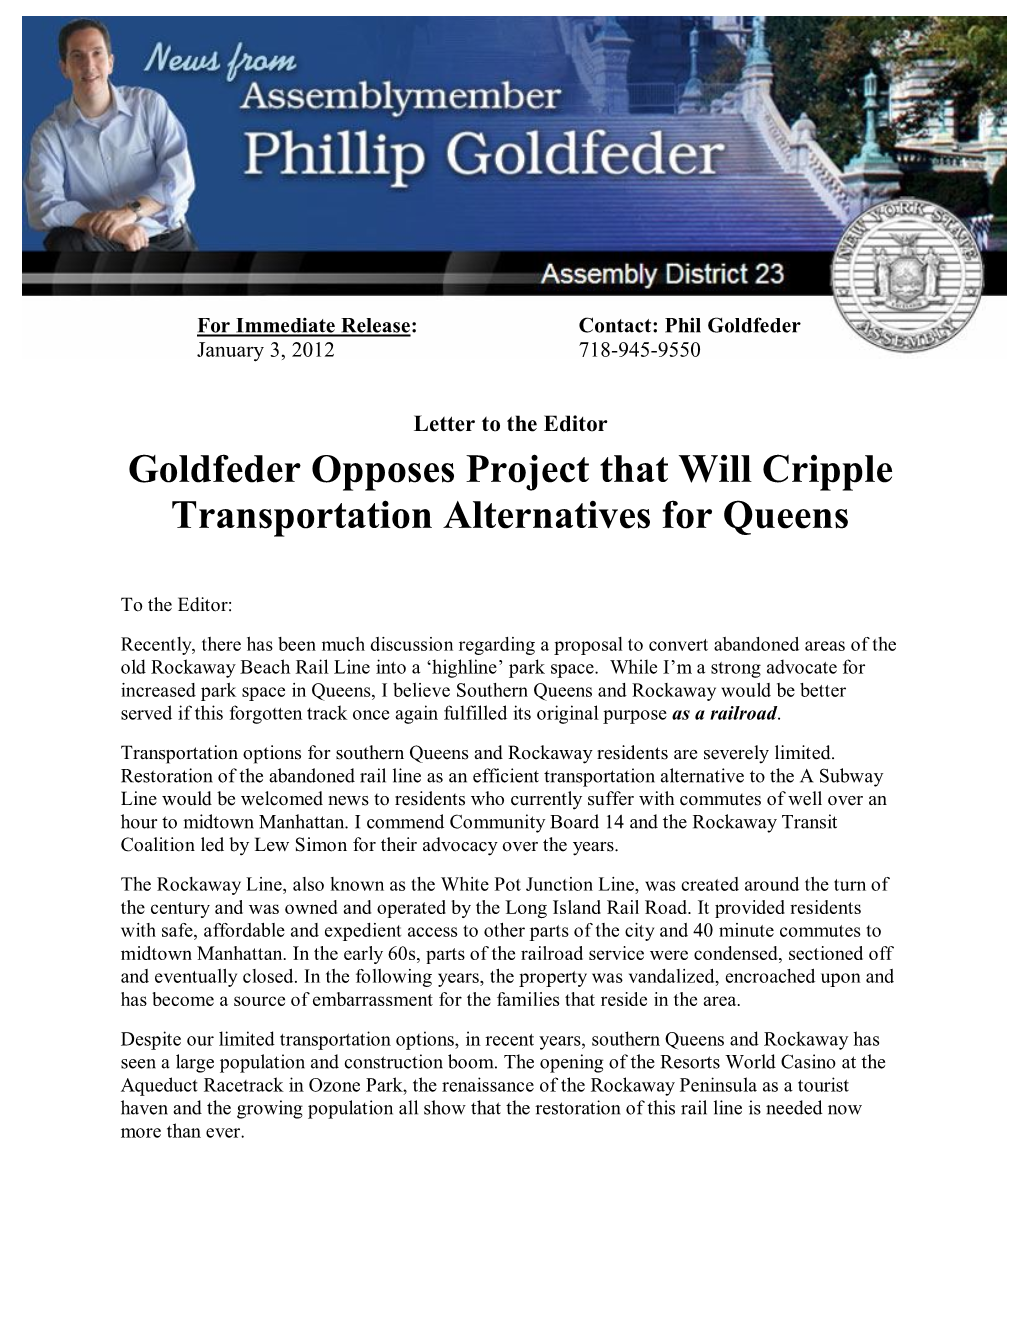 Goldfeder Opposes Project That Will Cripple Transportation Alternatives for Queens